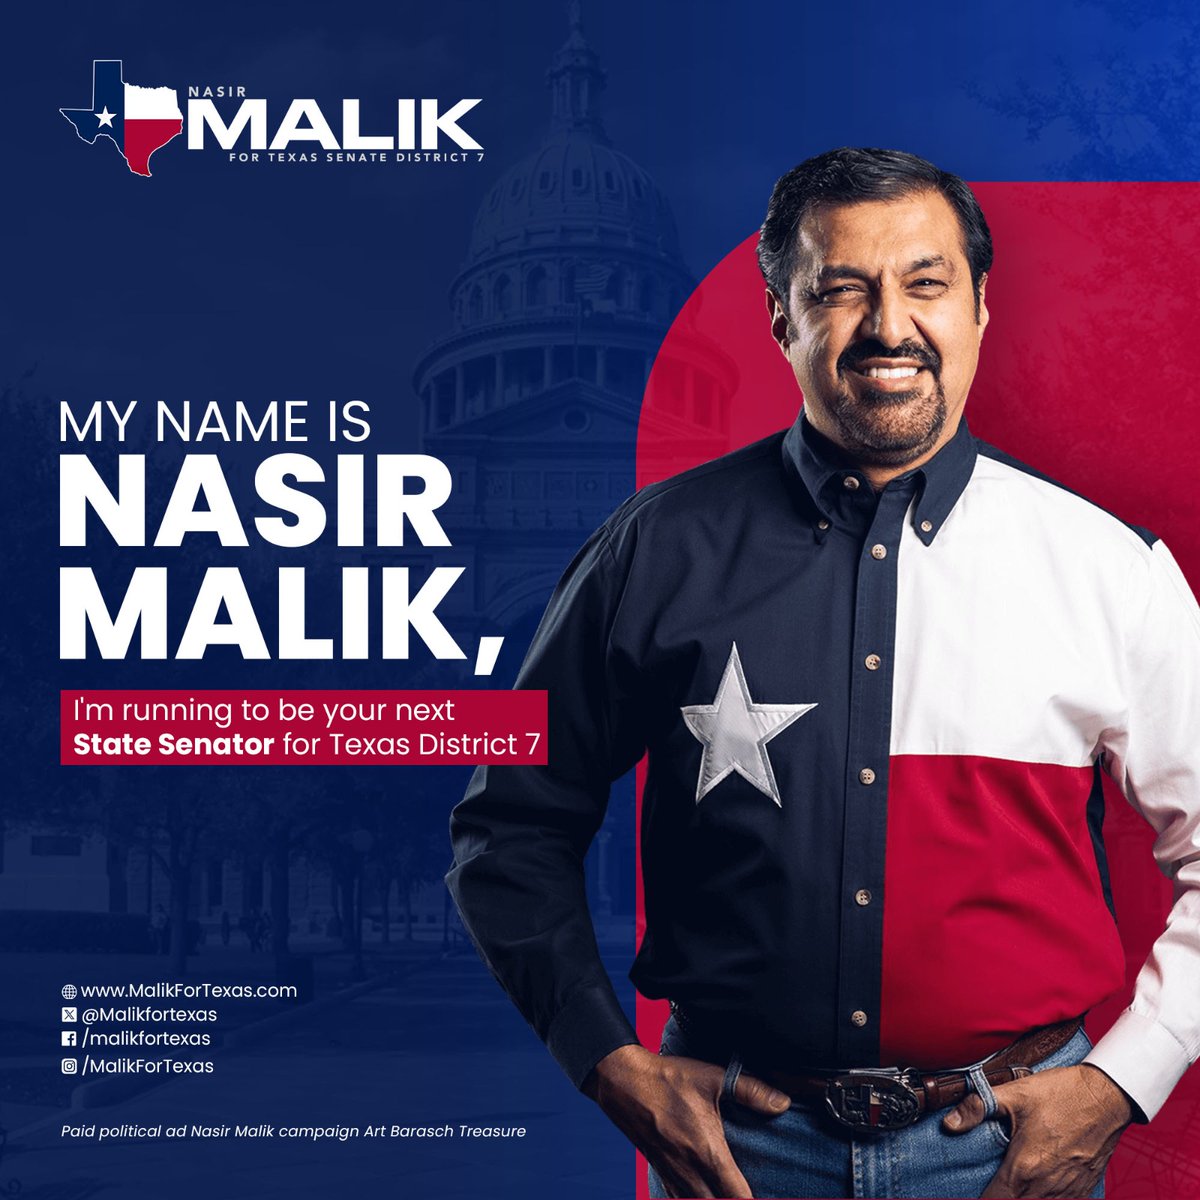 I am Nasir Malik, and I’m running to be your next State Senator. SD7 deserves a Senator who will fight for the teachers, students, and families in our community. I look forward to listening to folks across our district about the issues that impact them most. #MalikForTexas #SD7